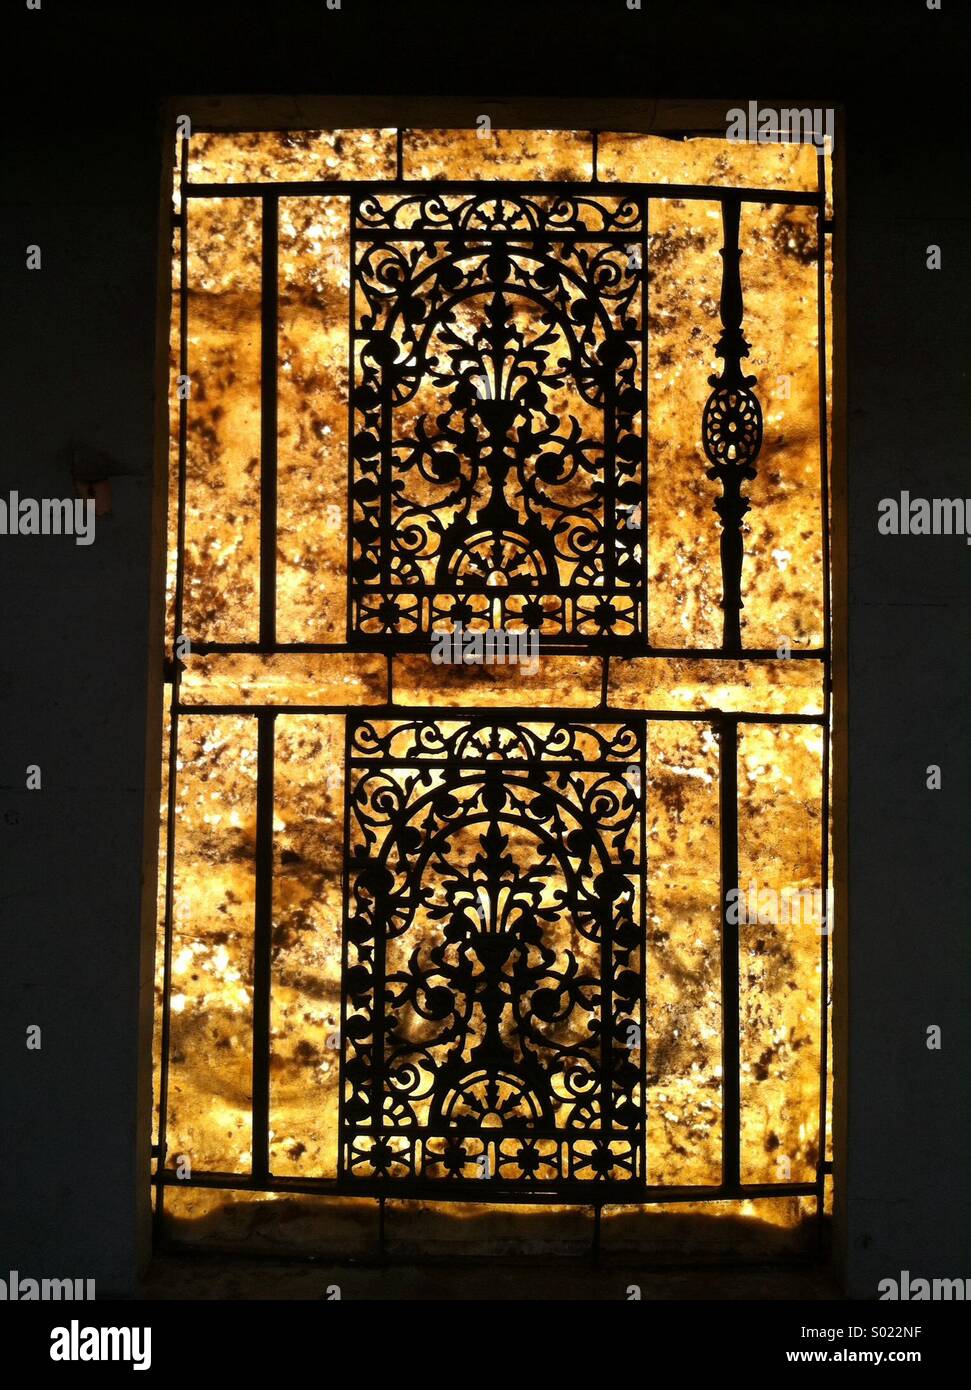 https://c8.alamy.com/comp/S022NF/decorative-victorian-era-wrought-iron-security-grill-on-window-S022NF.jpg